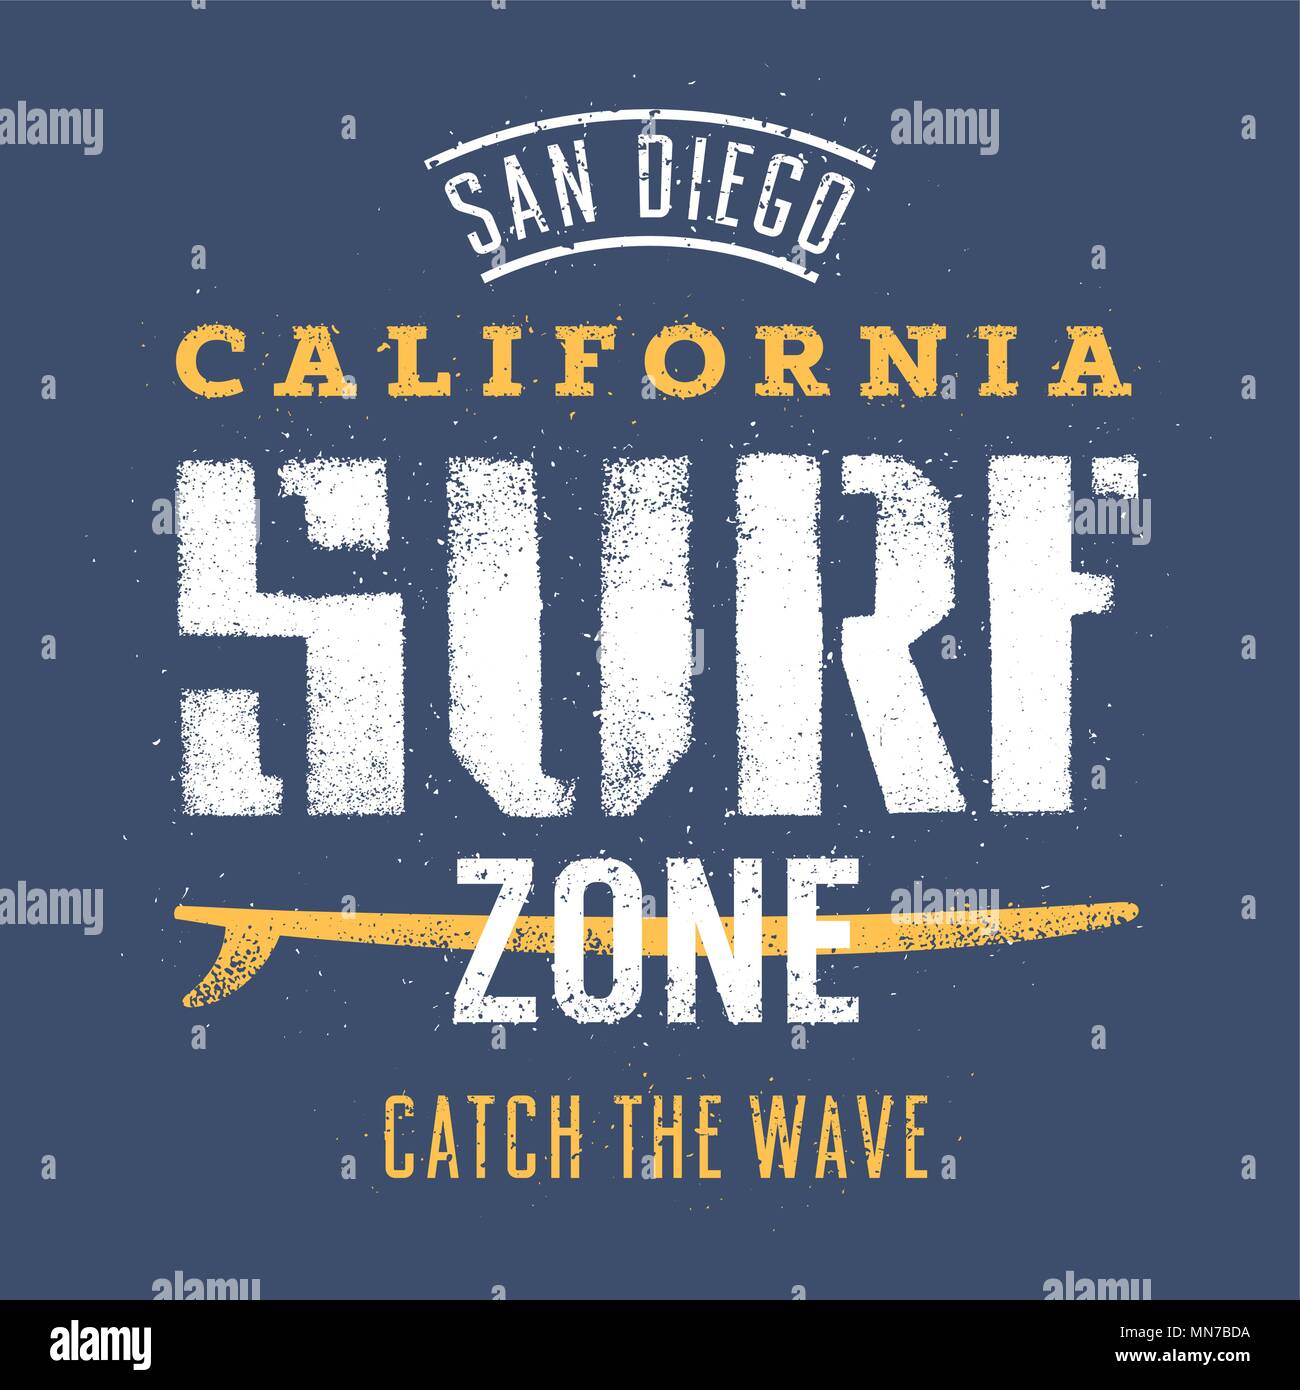 Surfing artwork. San Diego California Surf zone. Catch the wave. T shirt graphics Stock Vector